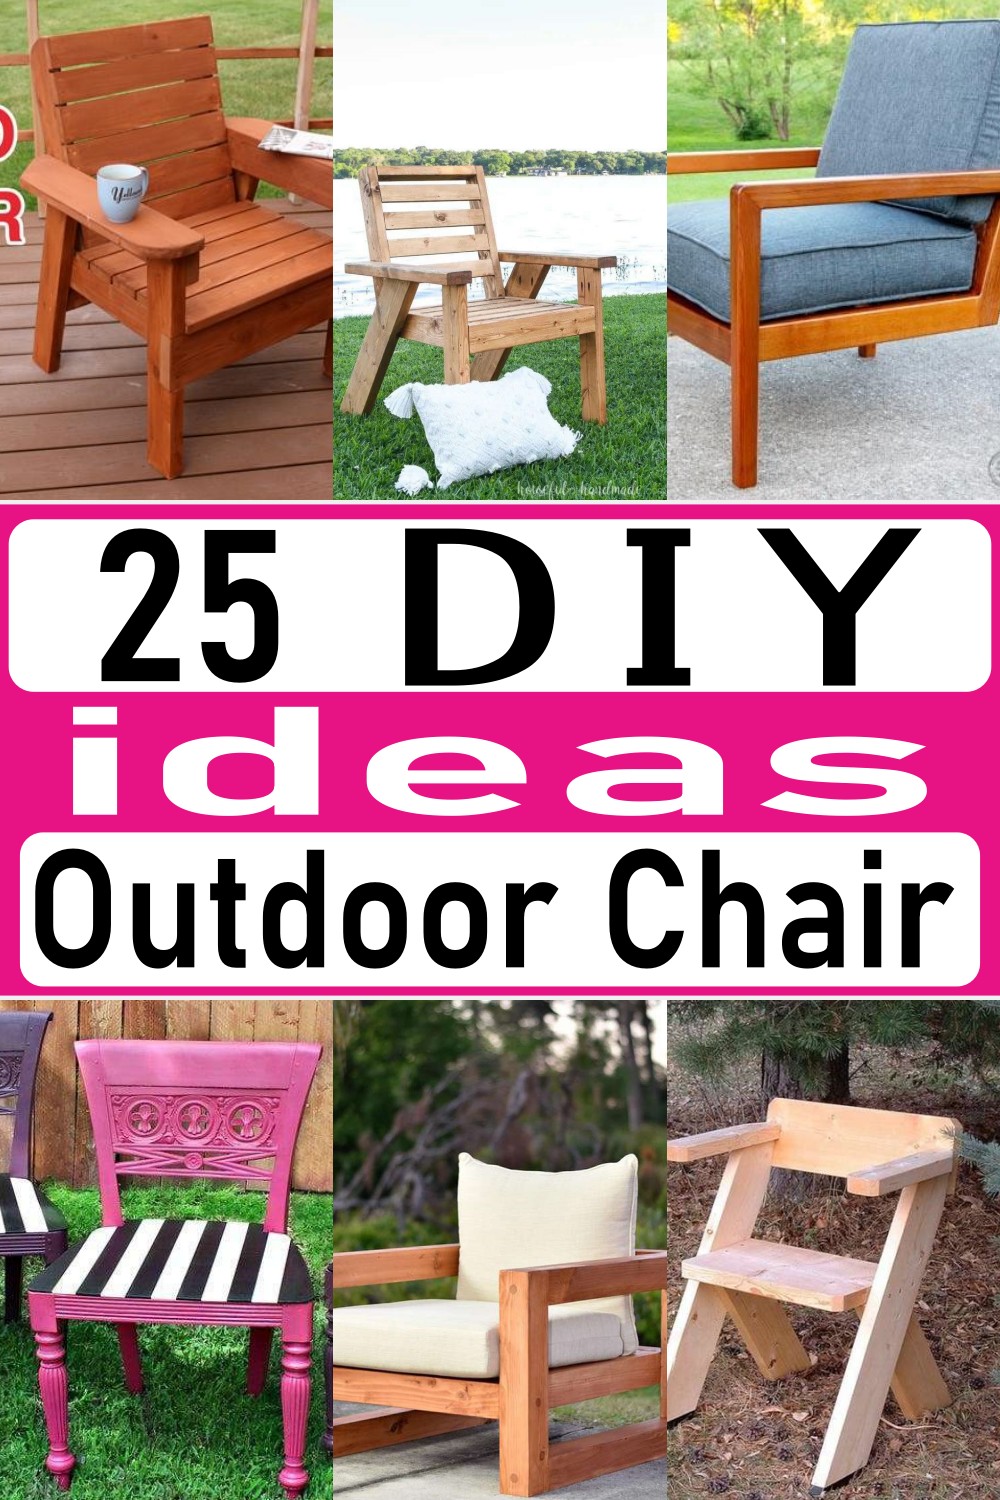 Outdoor Chair Plans